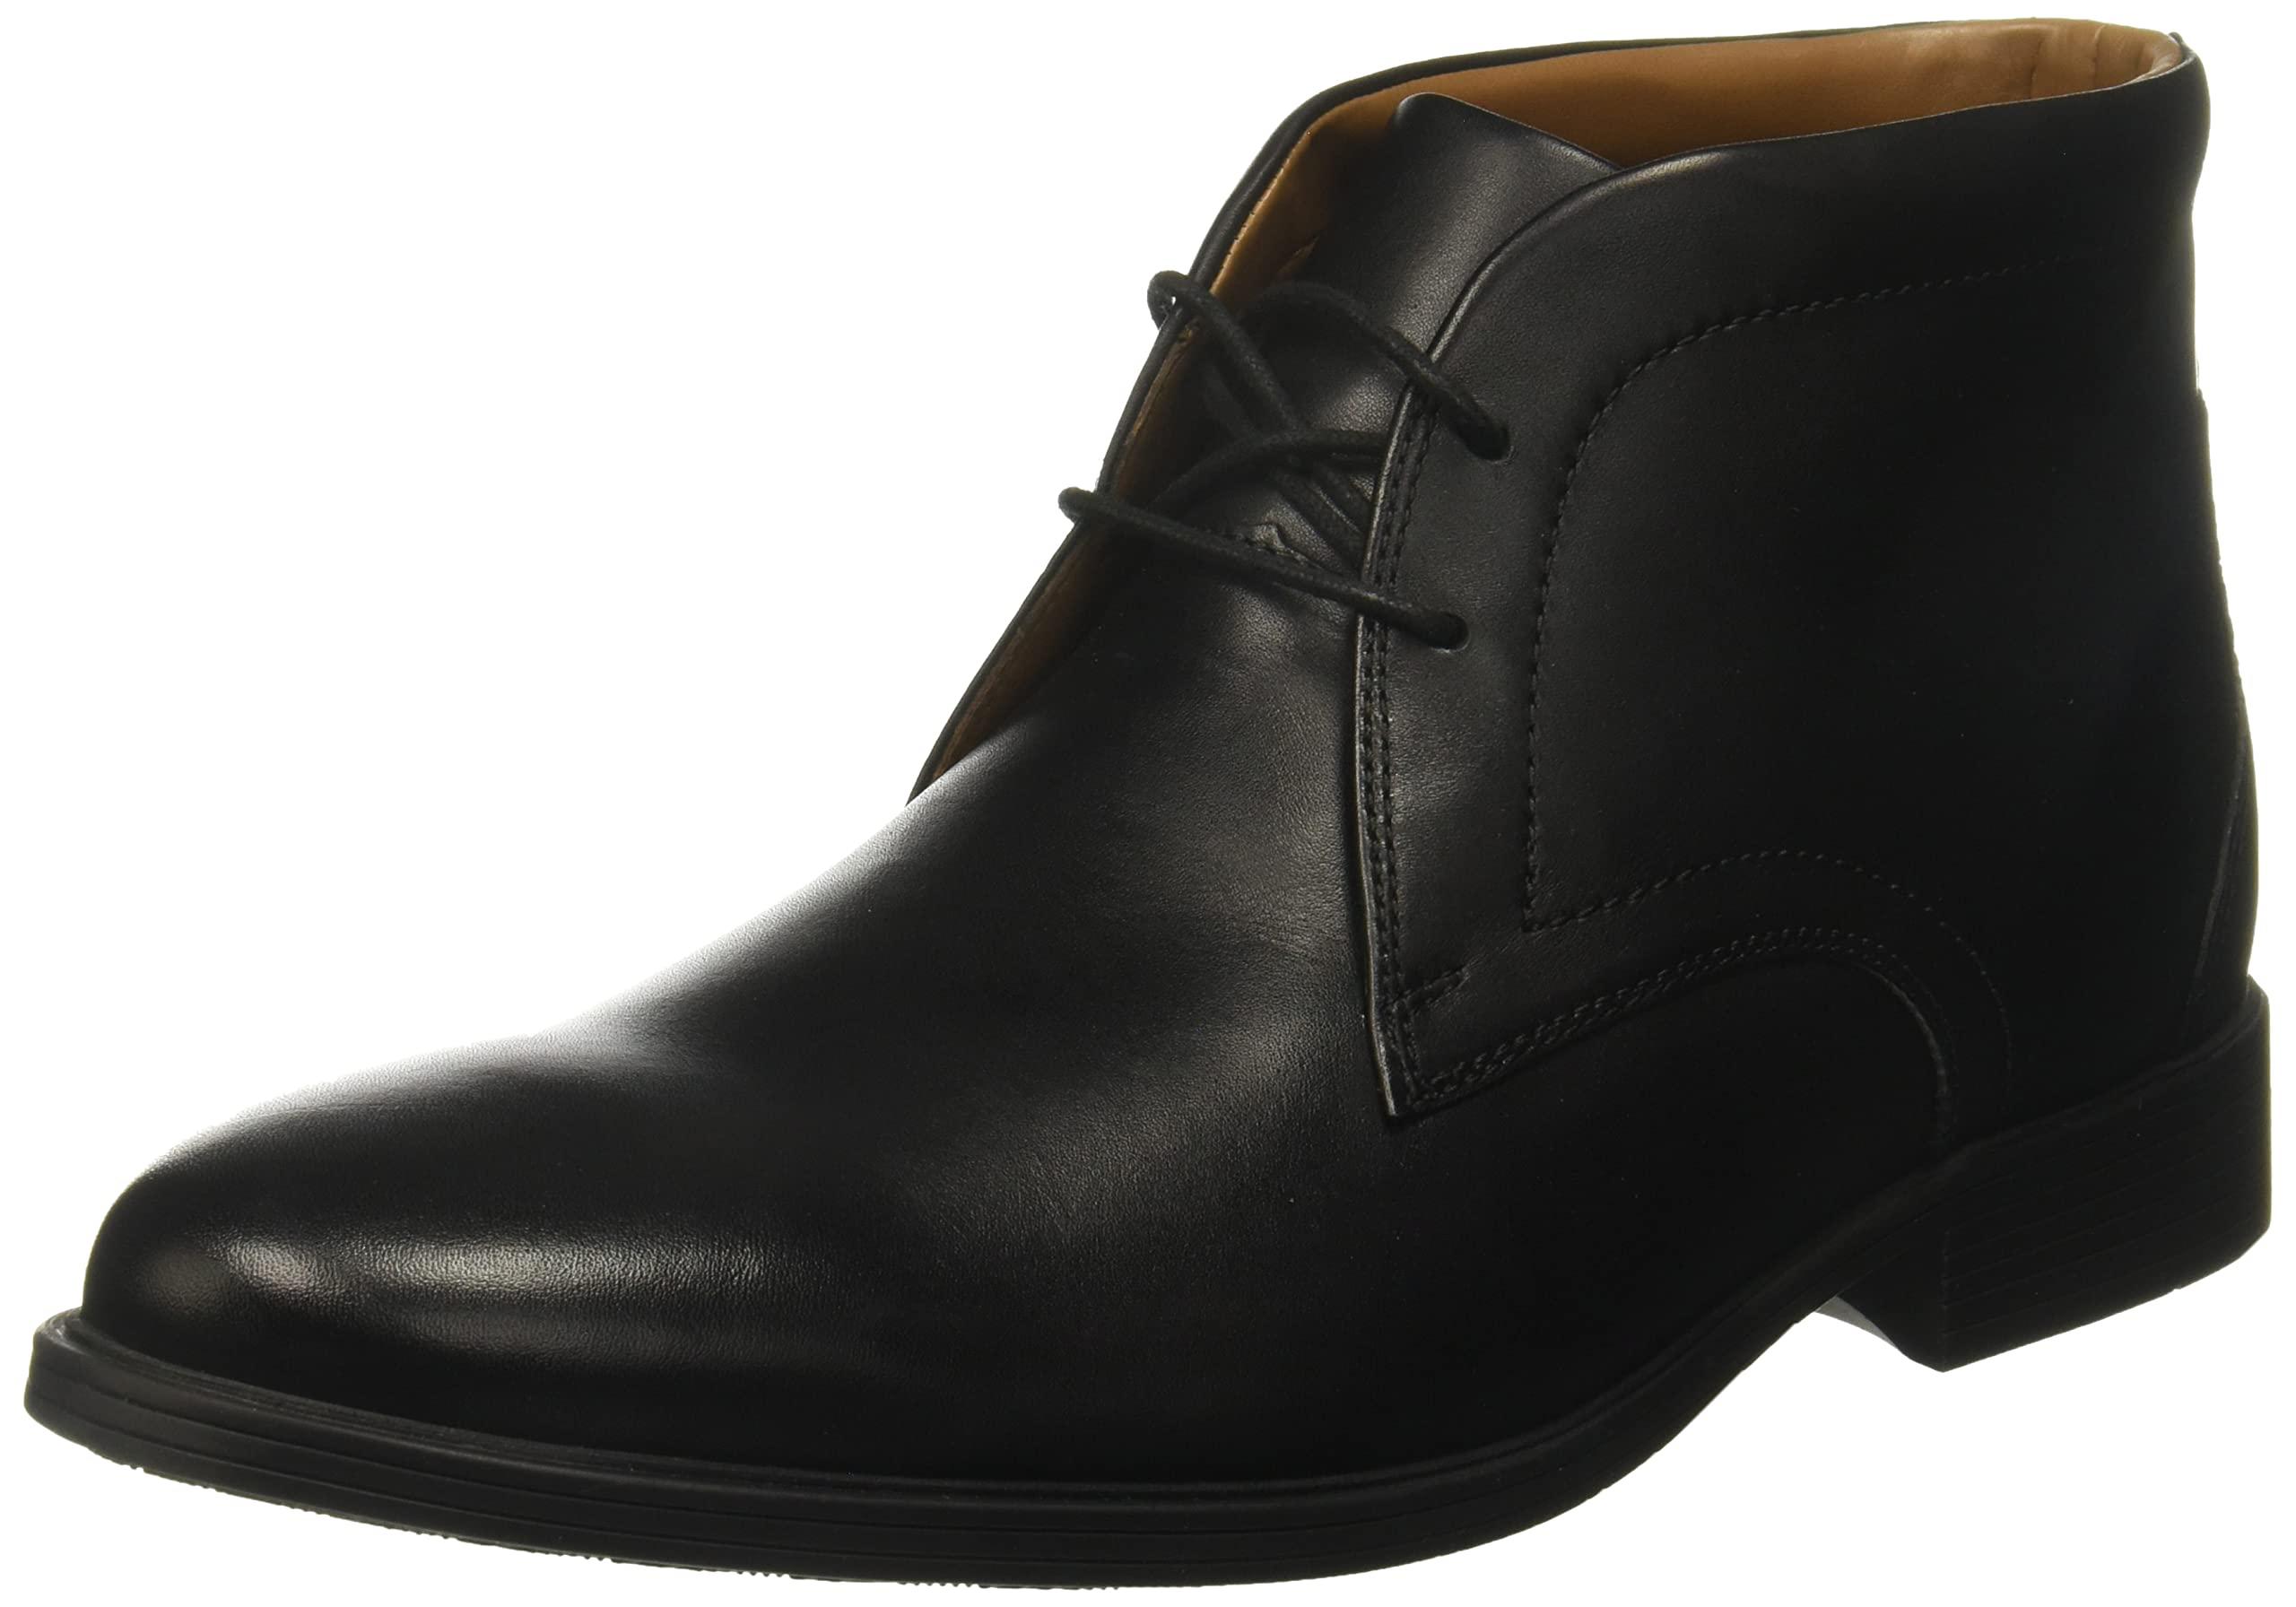 Clarks S Whiddon Mid Boots in Black Leather (Black) for Men - Save 39% |  Lyst